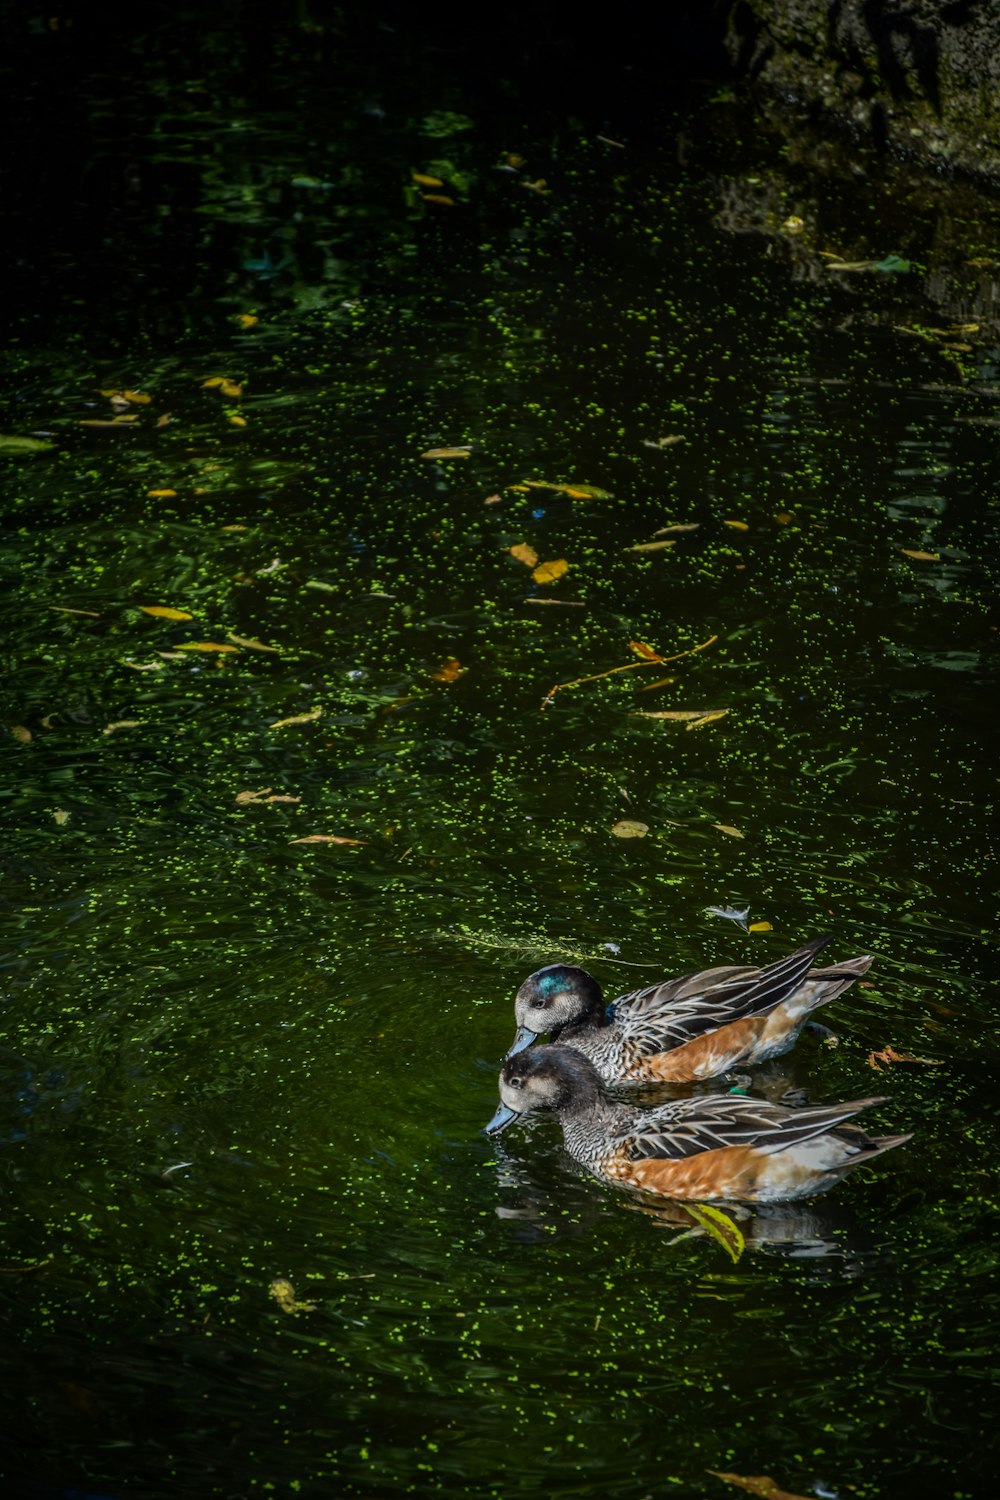 brown and white duck on water